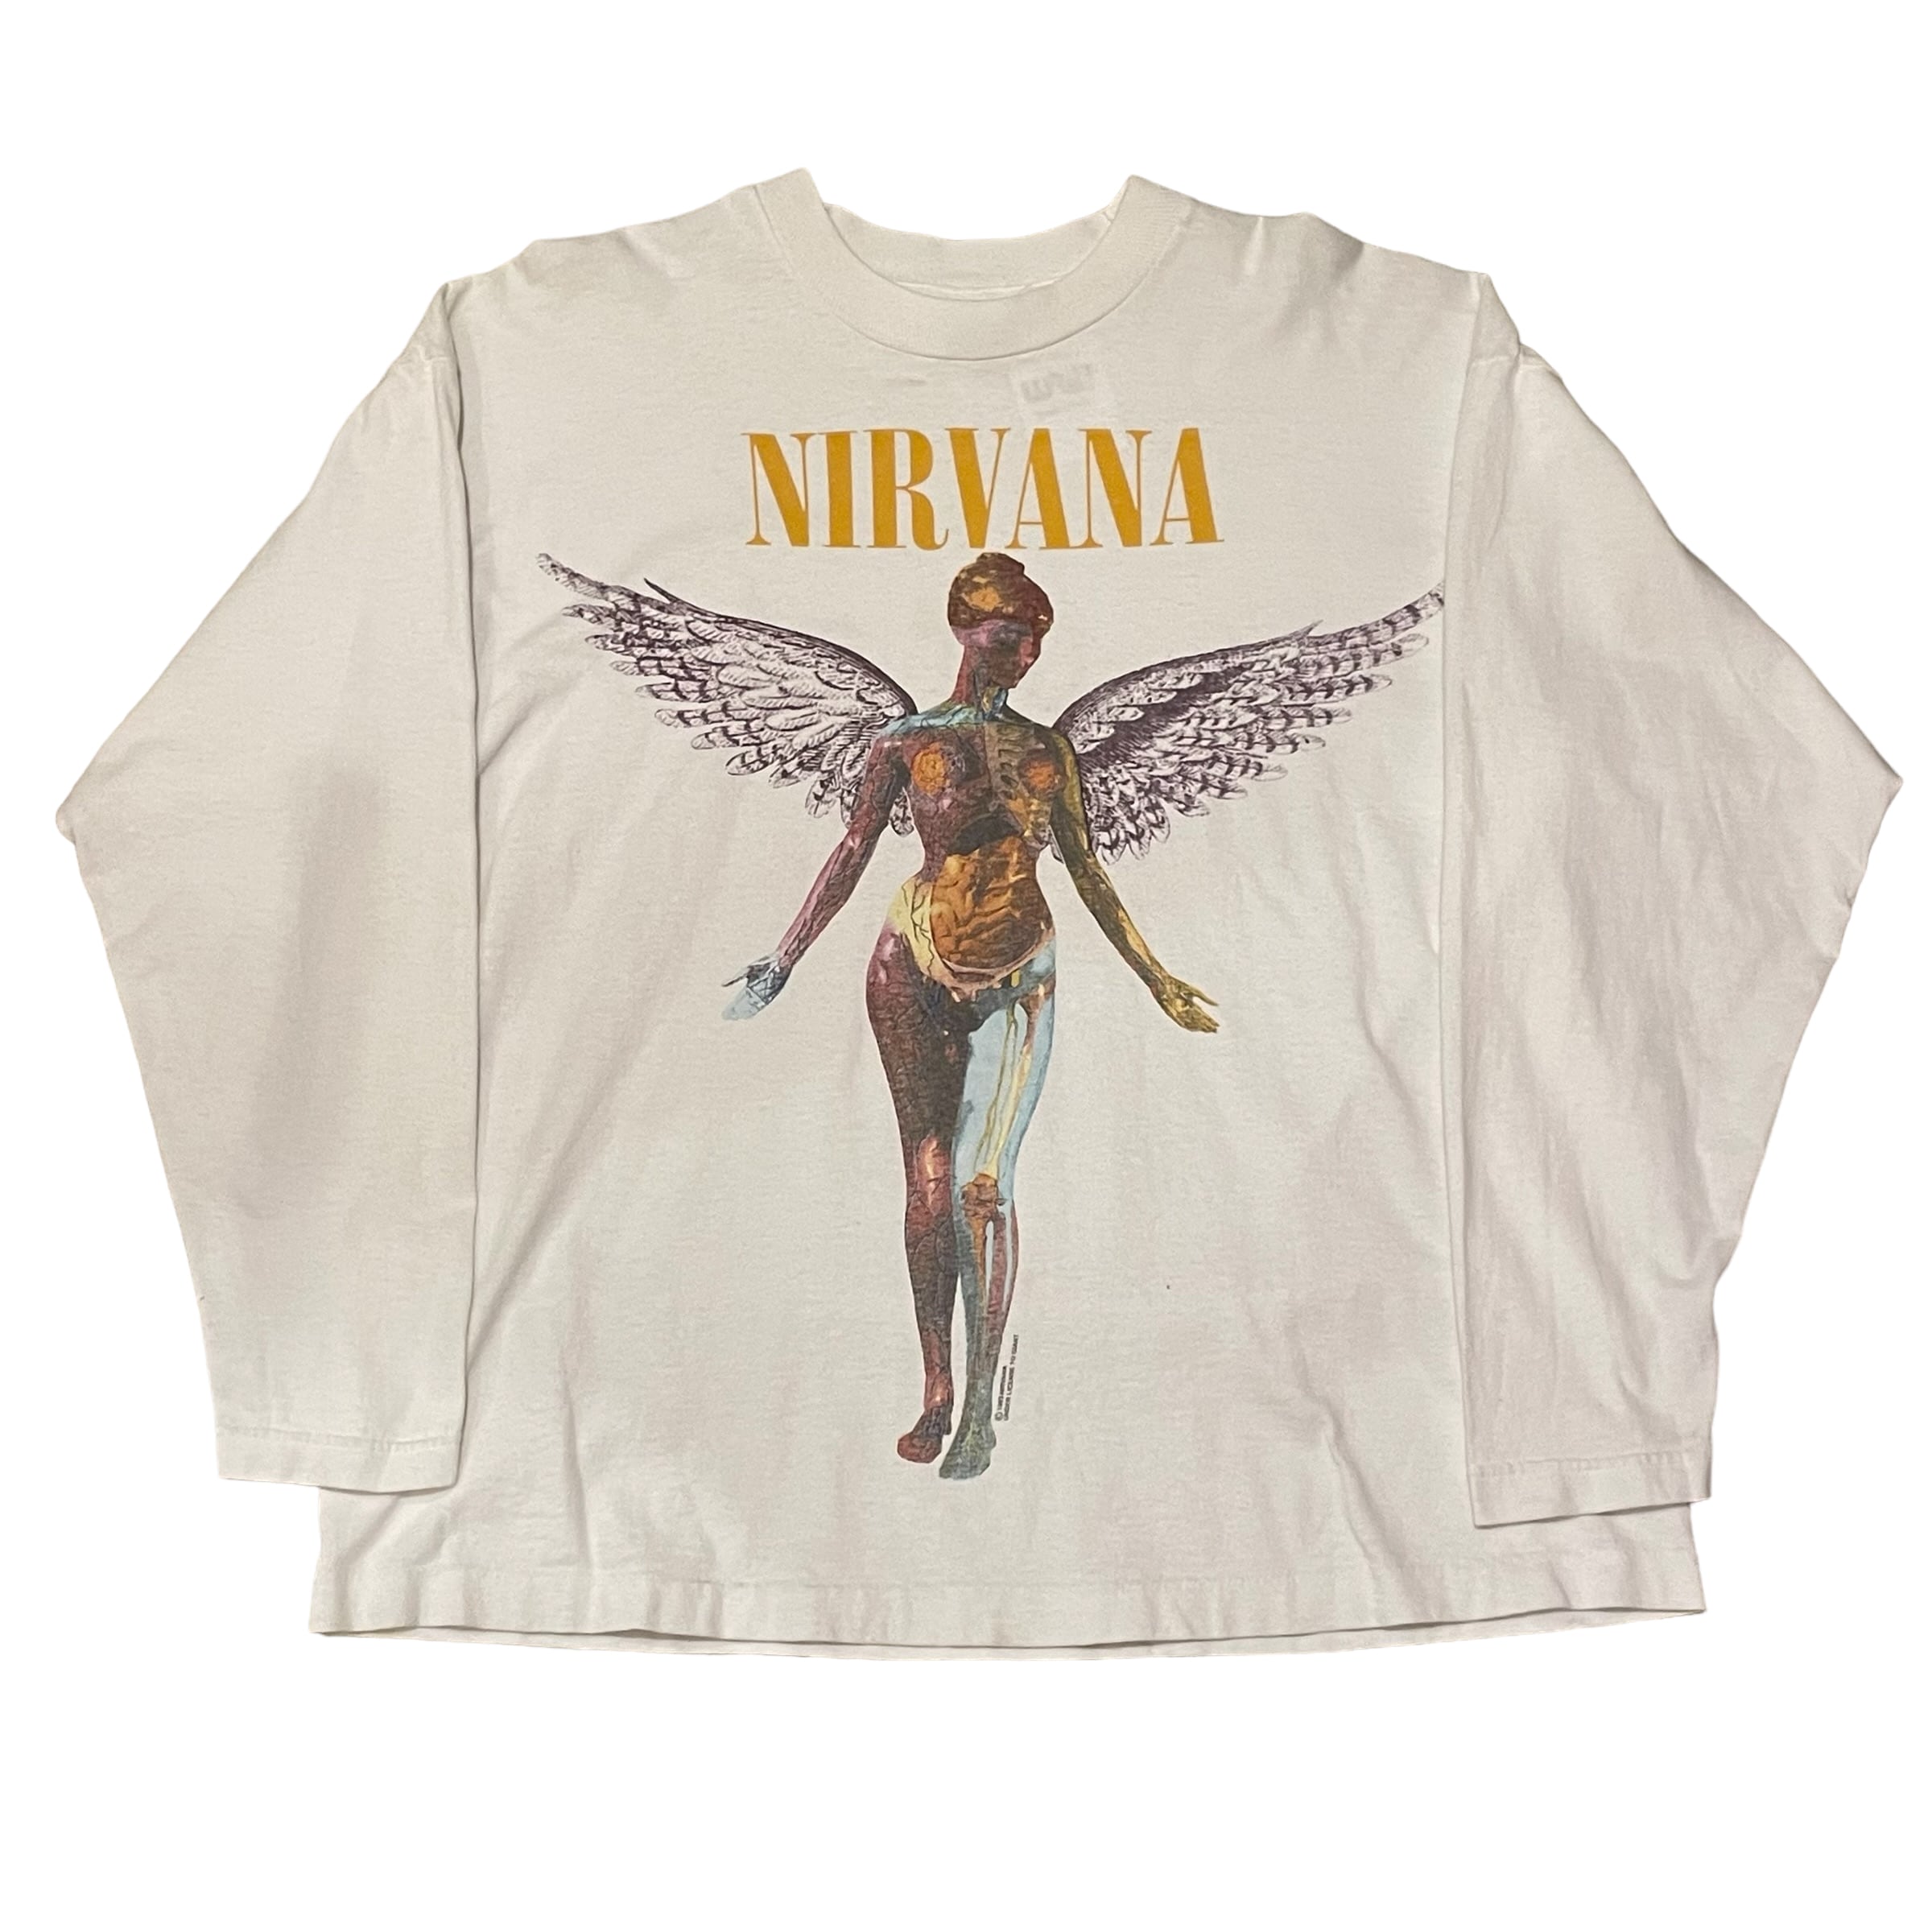 90s NIRVANA “IN UTERO” L/S t-shirt | What’z up powered by BASE